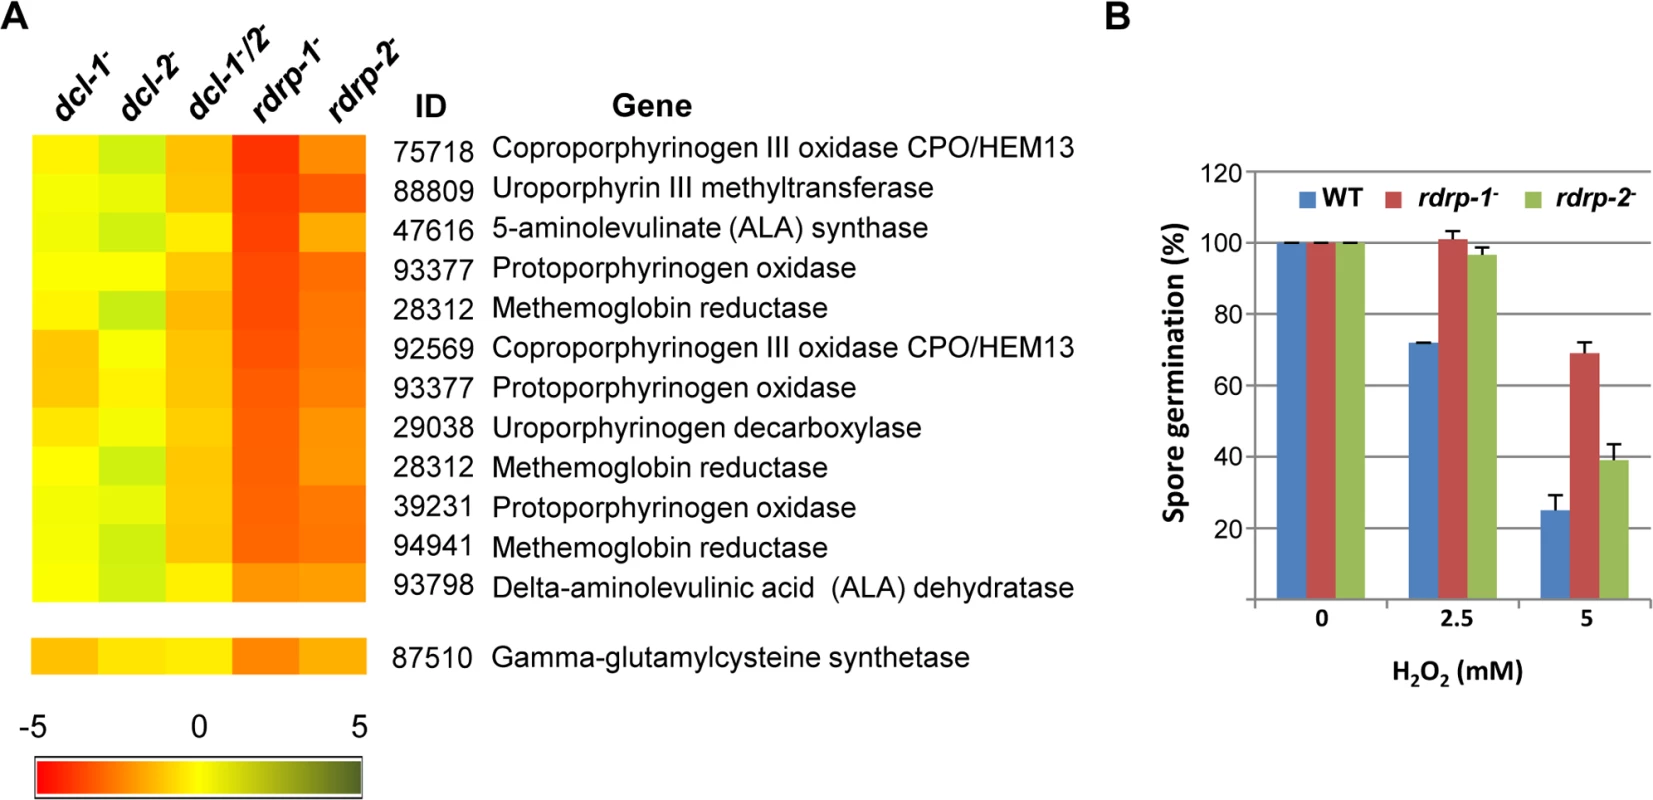 Differential regulation of genes involved in heme B biosynthesis or metabolism and oxidative stress response in <i>rdrp-</i> mutants.